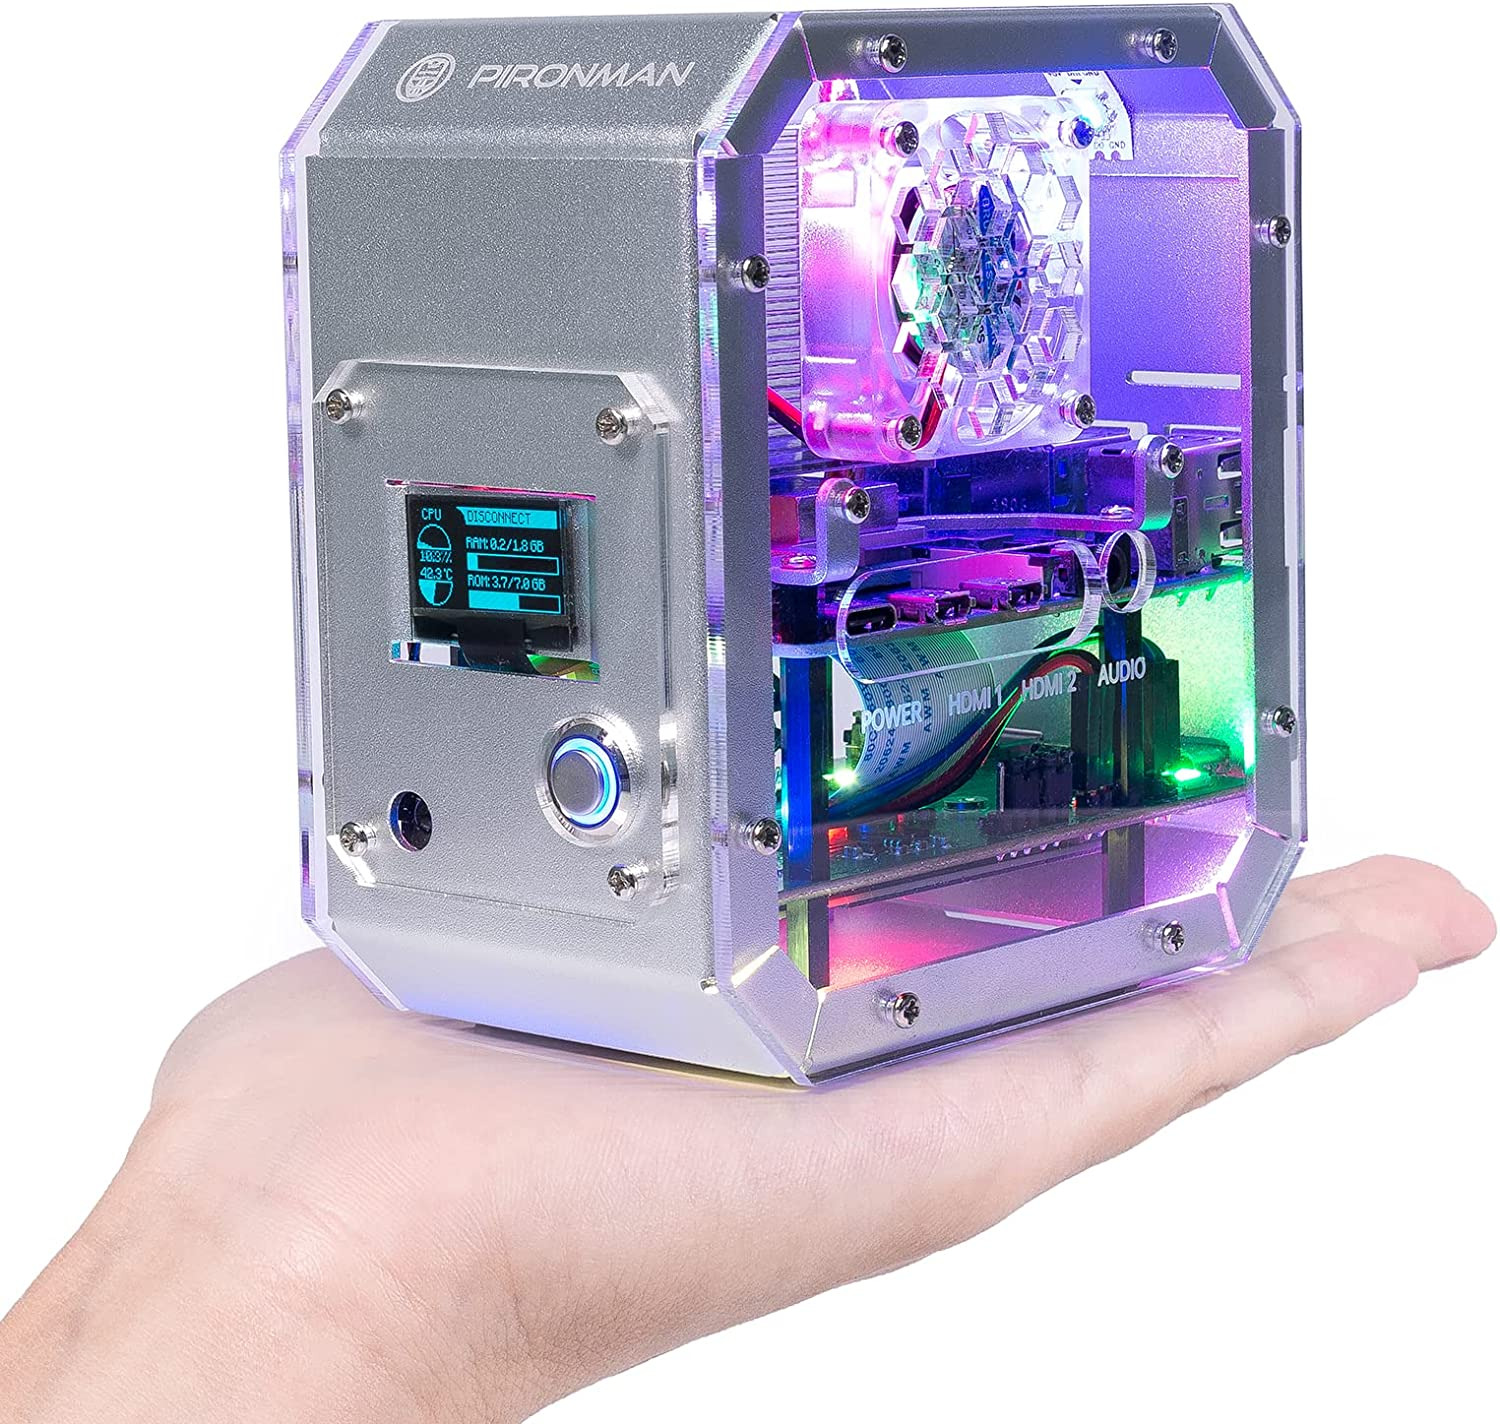 Pironman Mini PC Case for Raspberry Pi - Aluminum Alloy Tower Case with Fan, Tow